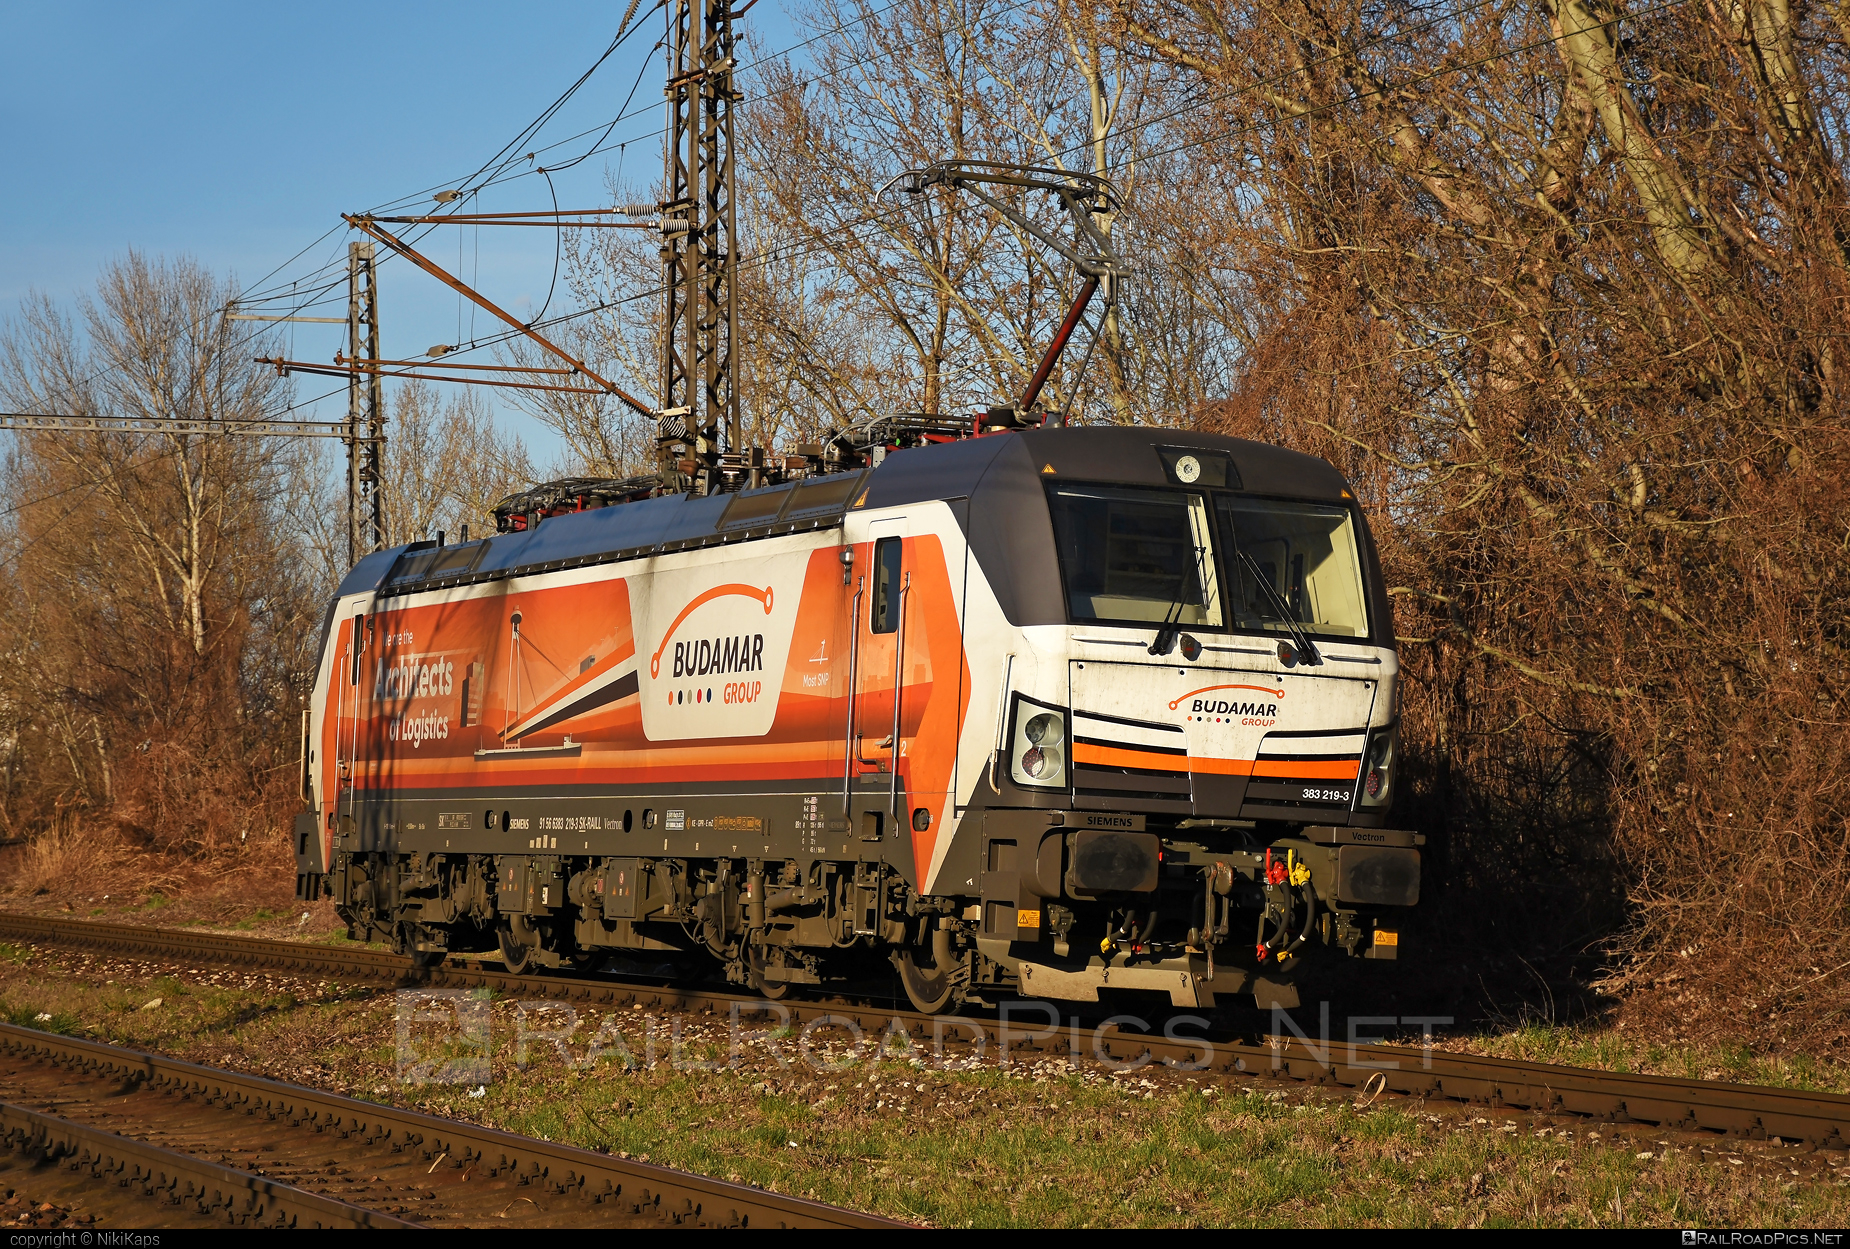 Siemens Vectron MS - 383 219-3 operated by LOKORAIL, a.s. #RollingStockLease #RollingStockLeaseSro #budamar #lokorail #lrl #raill #siemens #siemensVectron #siemensVectronMS #vectron #vectronMS